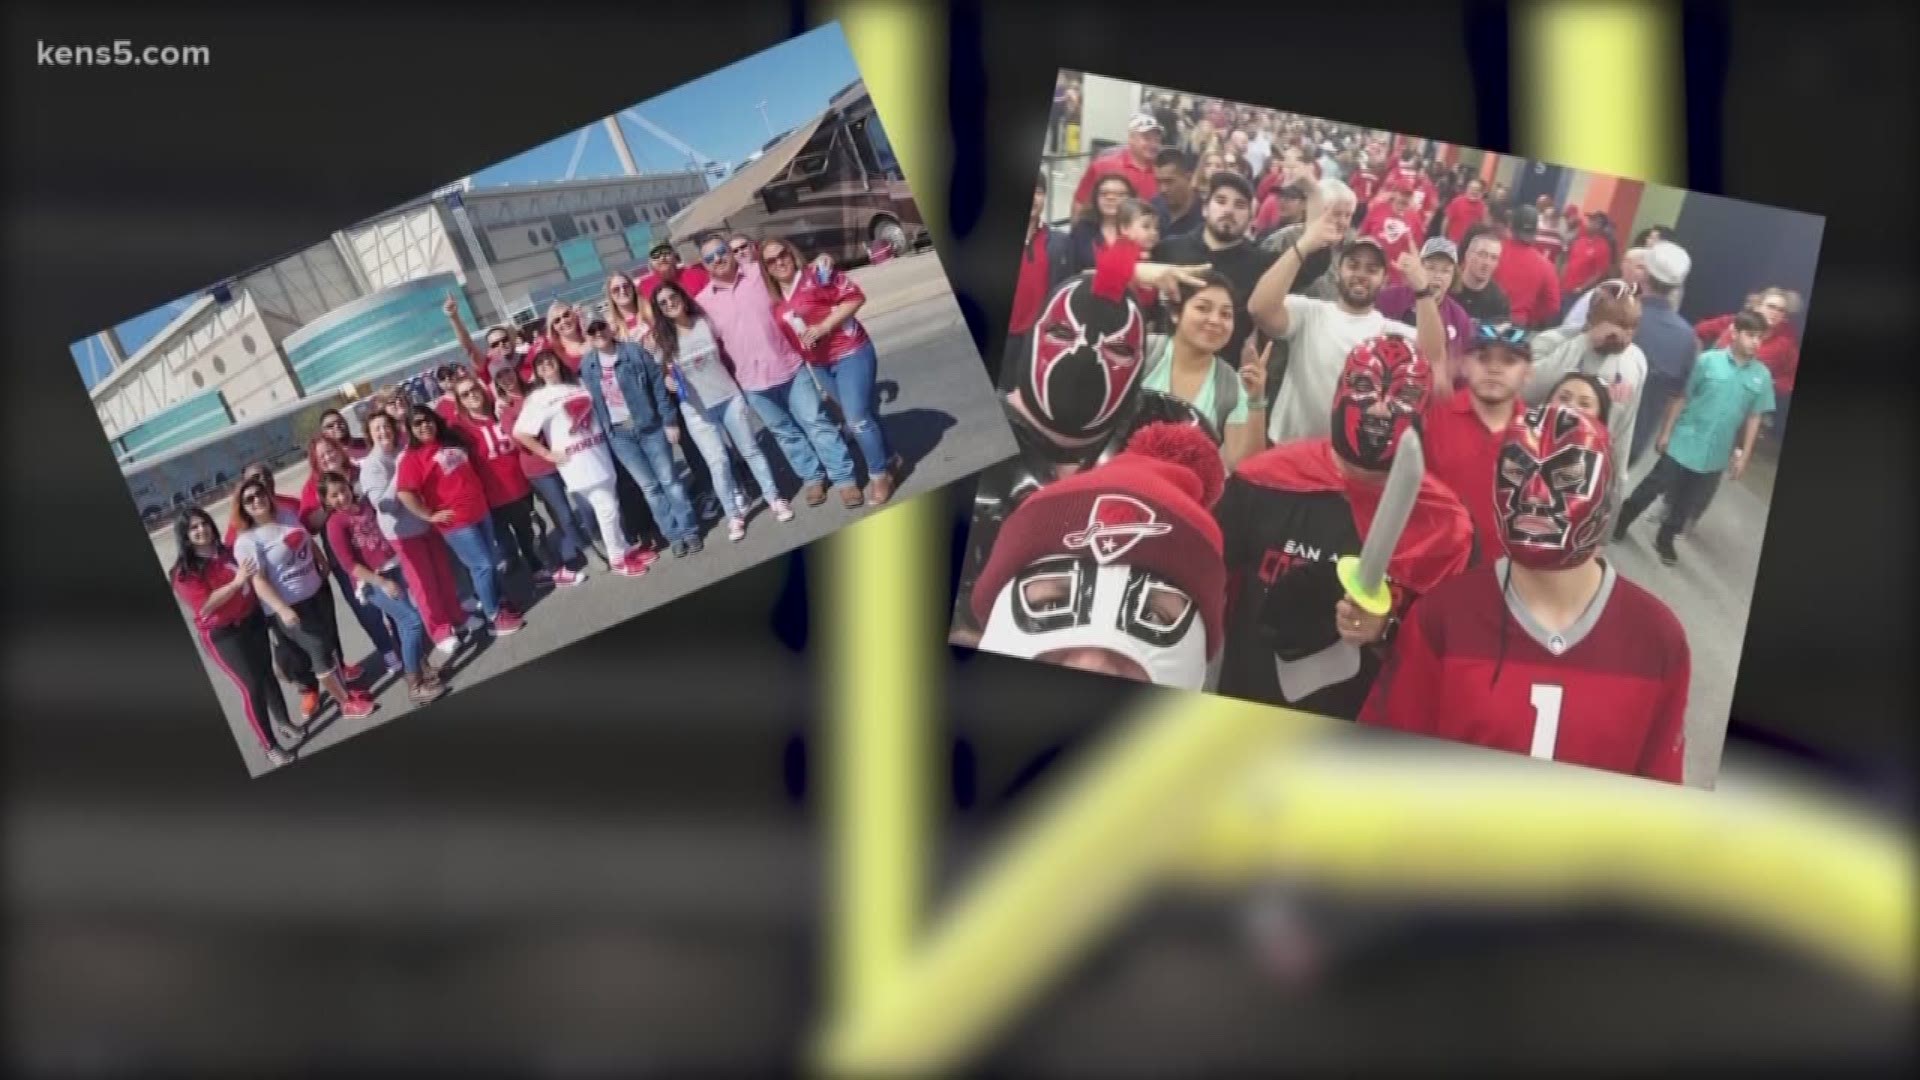 The San Antonio Commanders may have lost their second game, but their fans say they took home a "W."